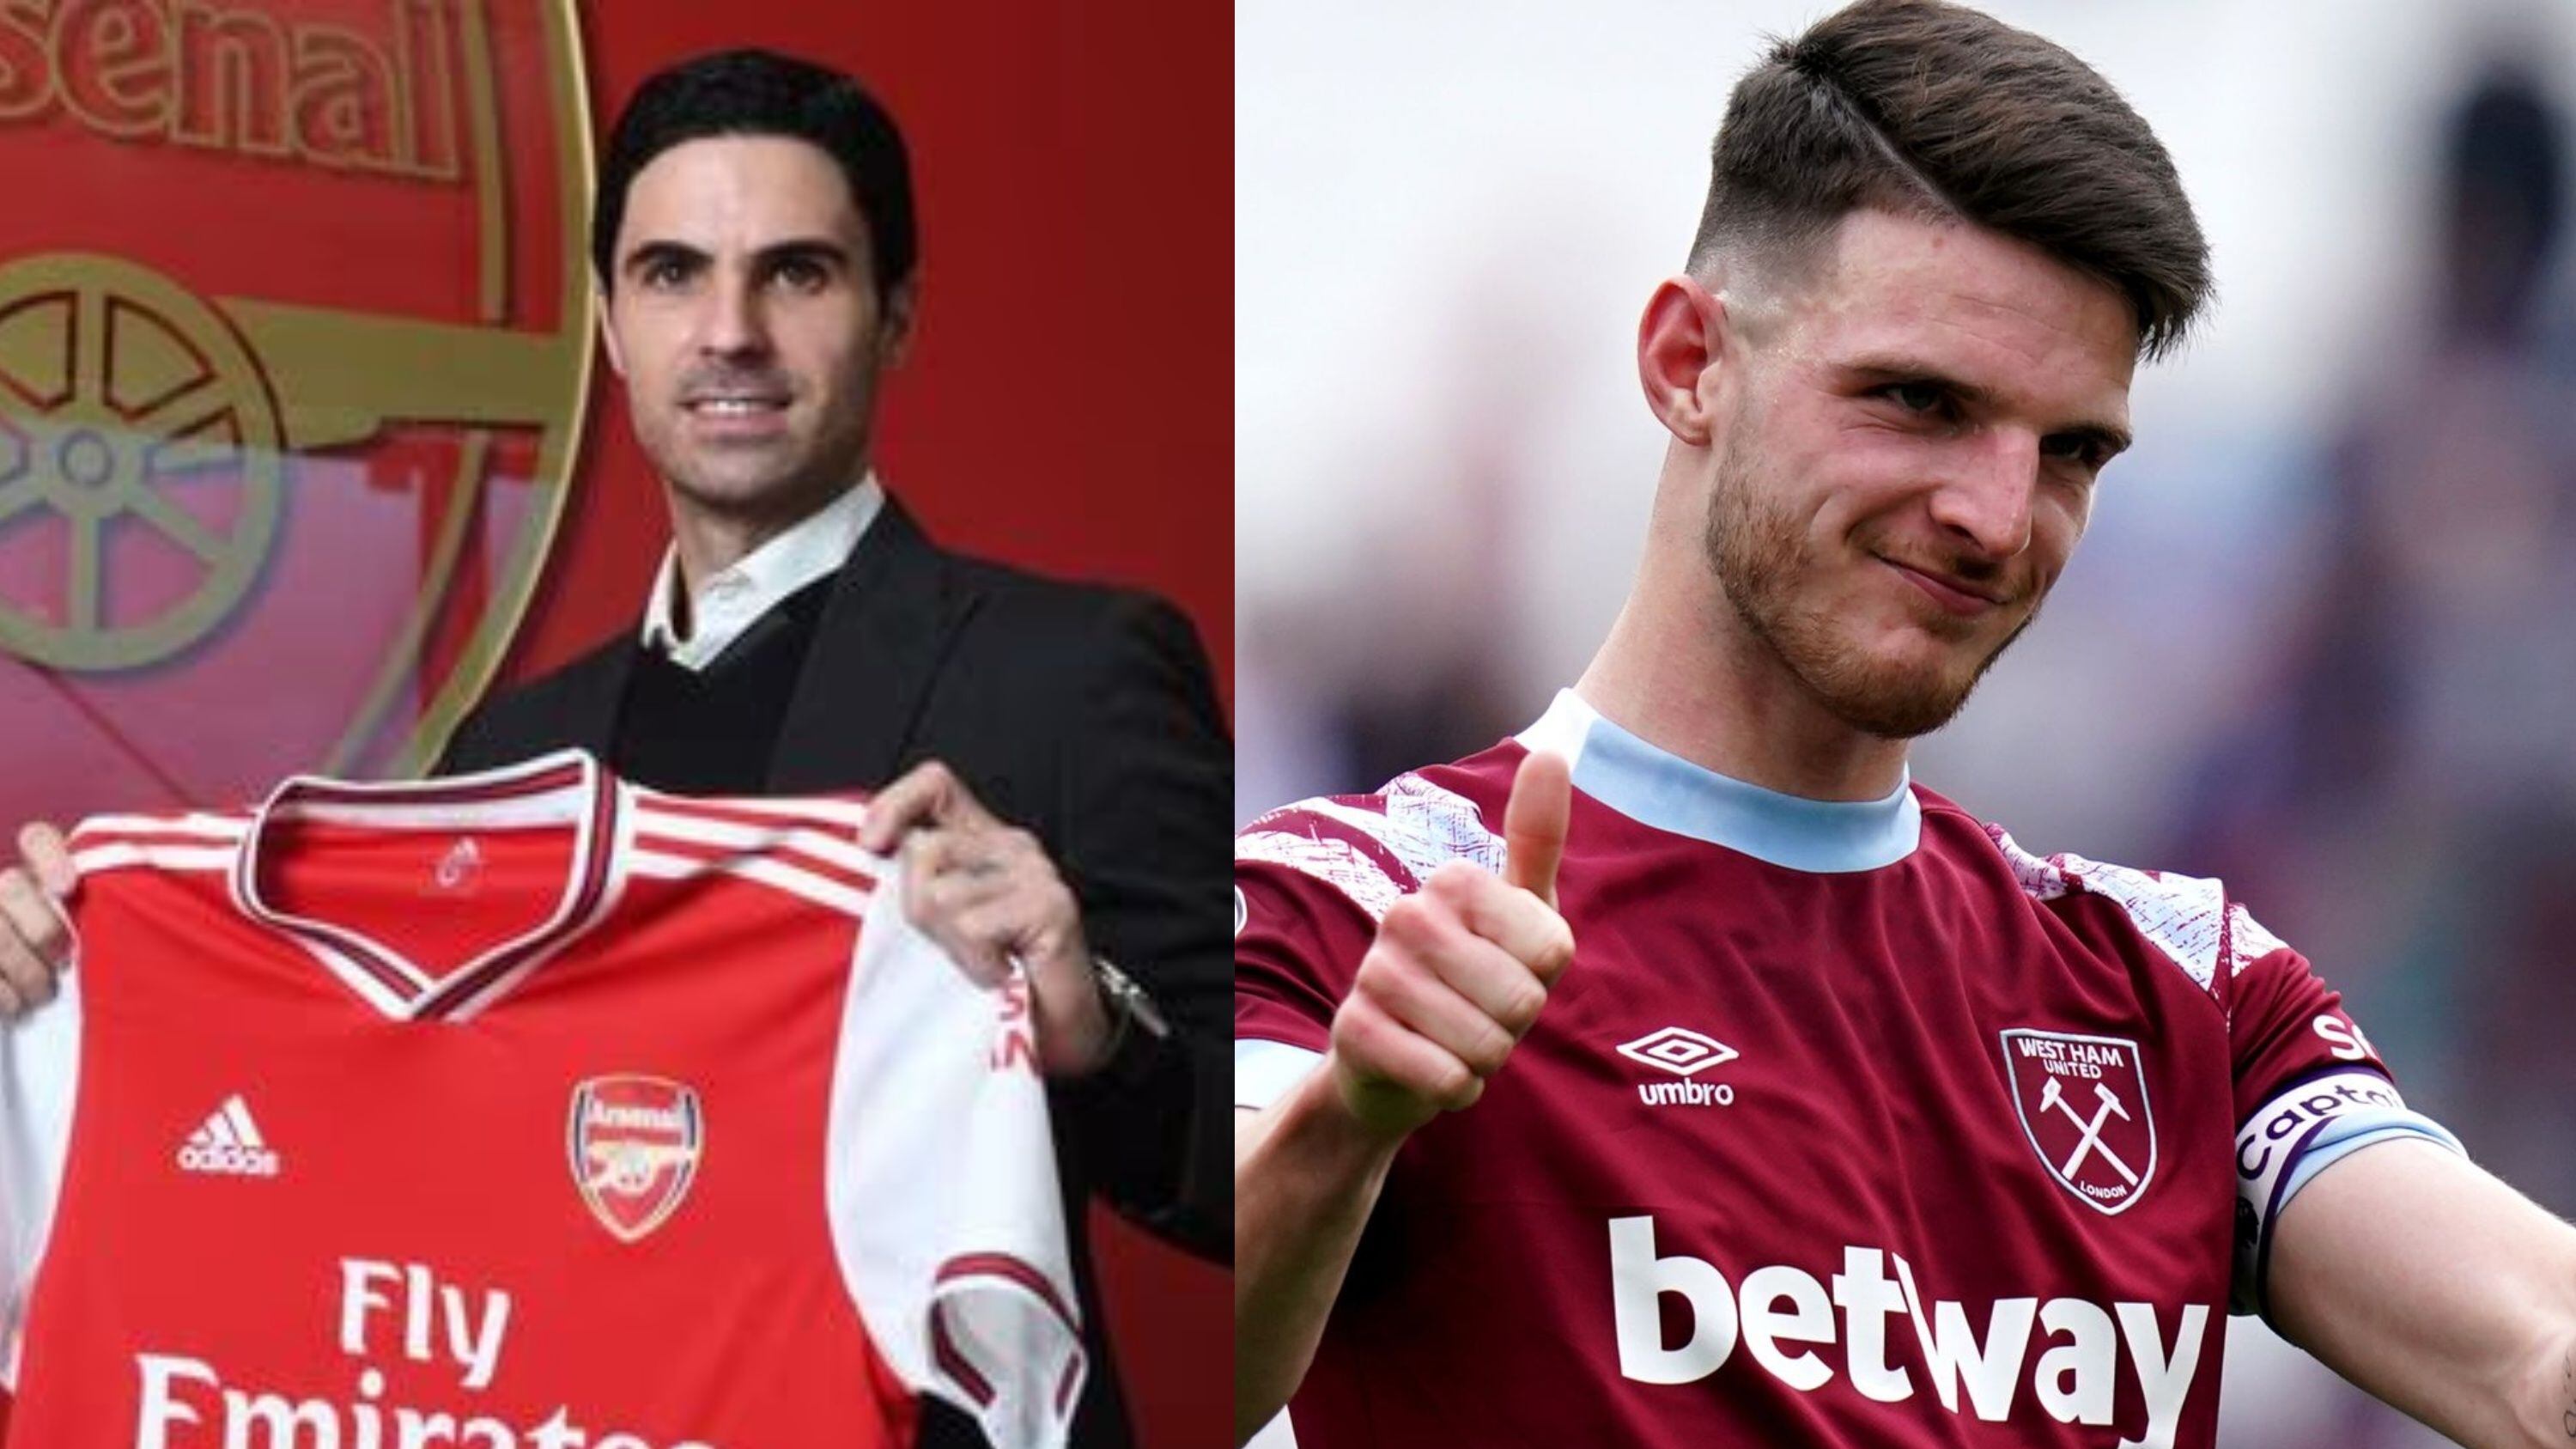 They said Arsenal would sign him, Declan Rice's betrayal to the Gunners